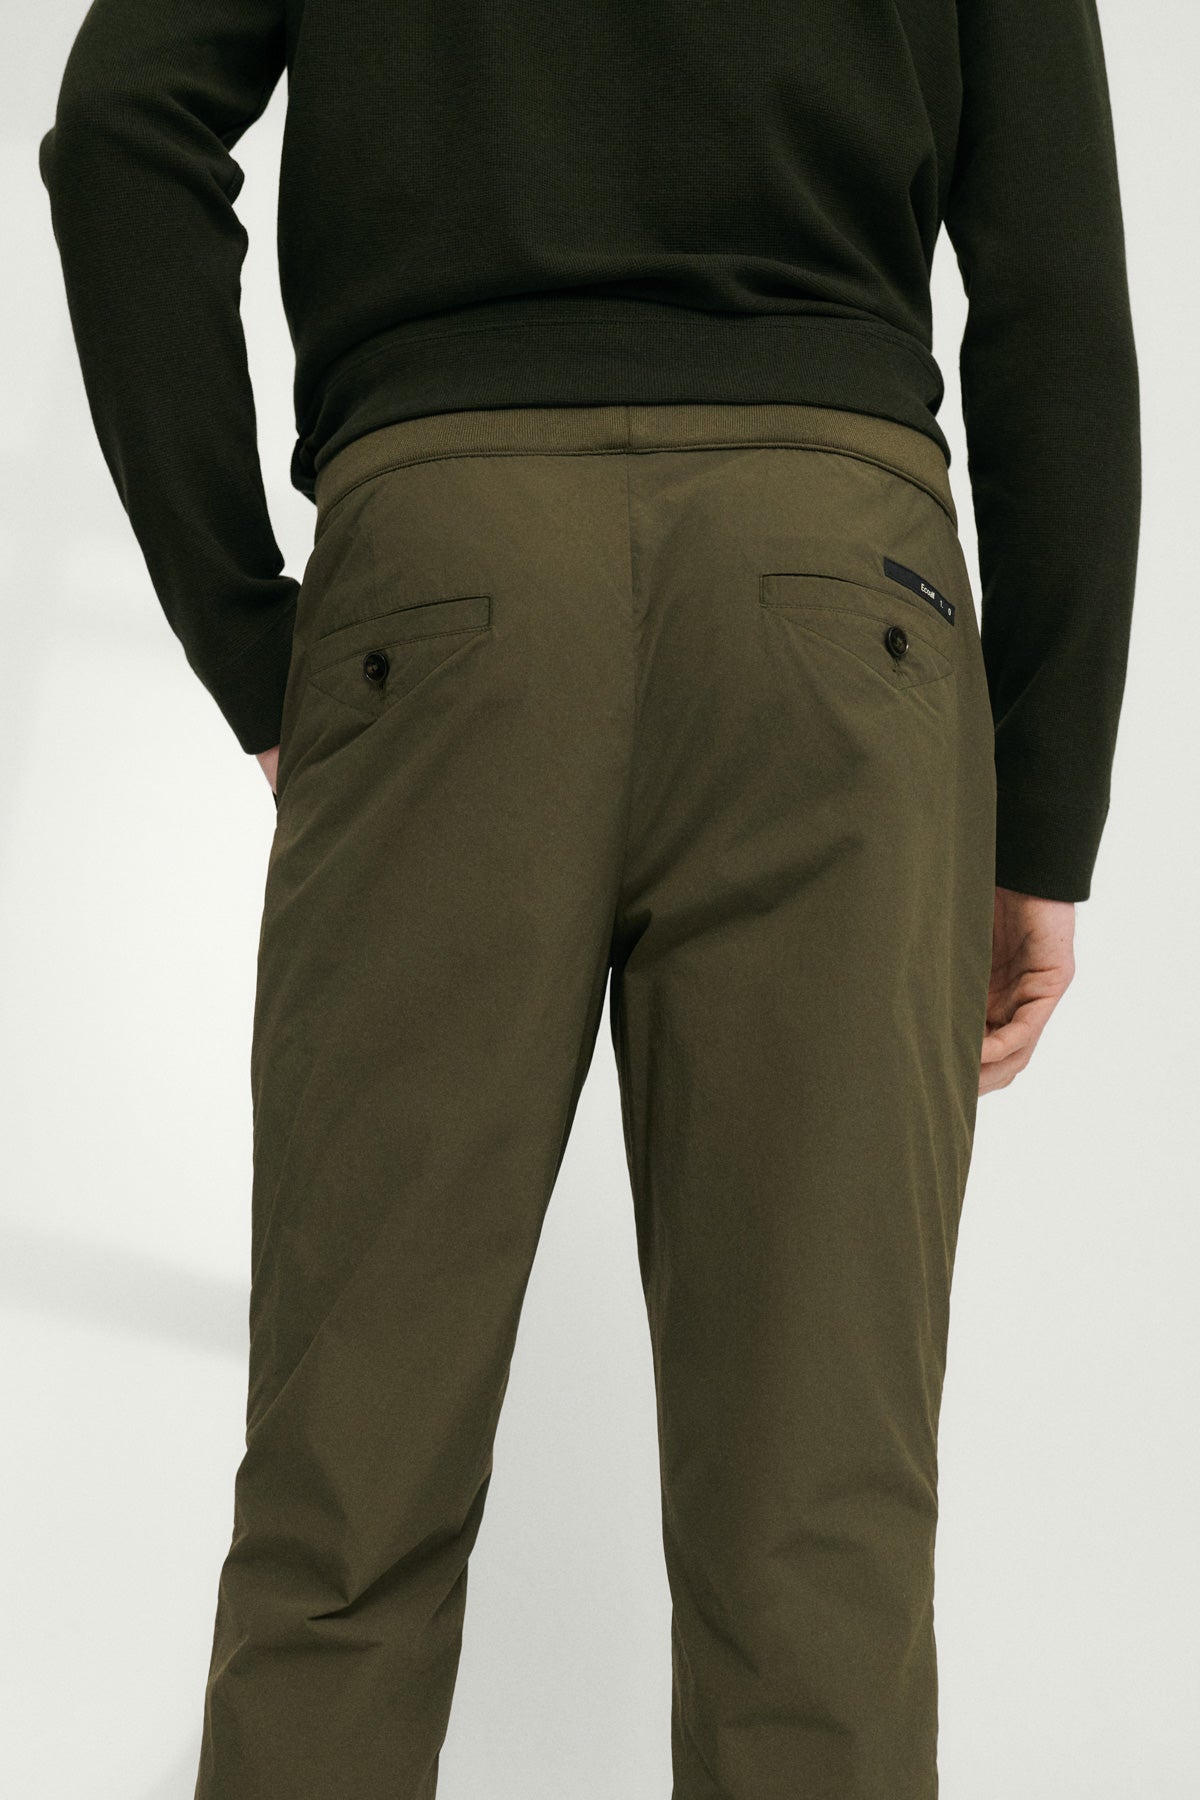 NIGER TROUSERS GREEN